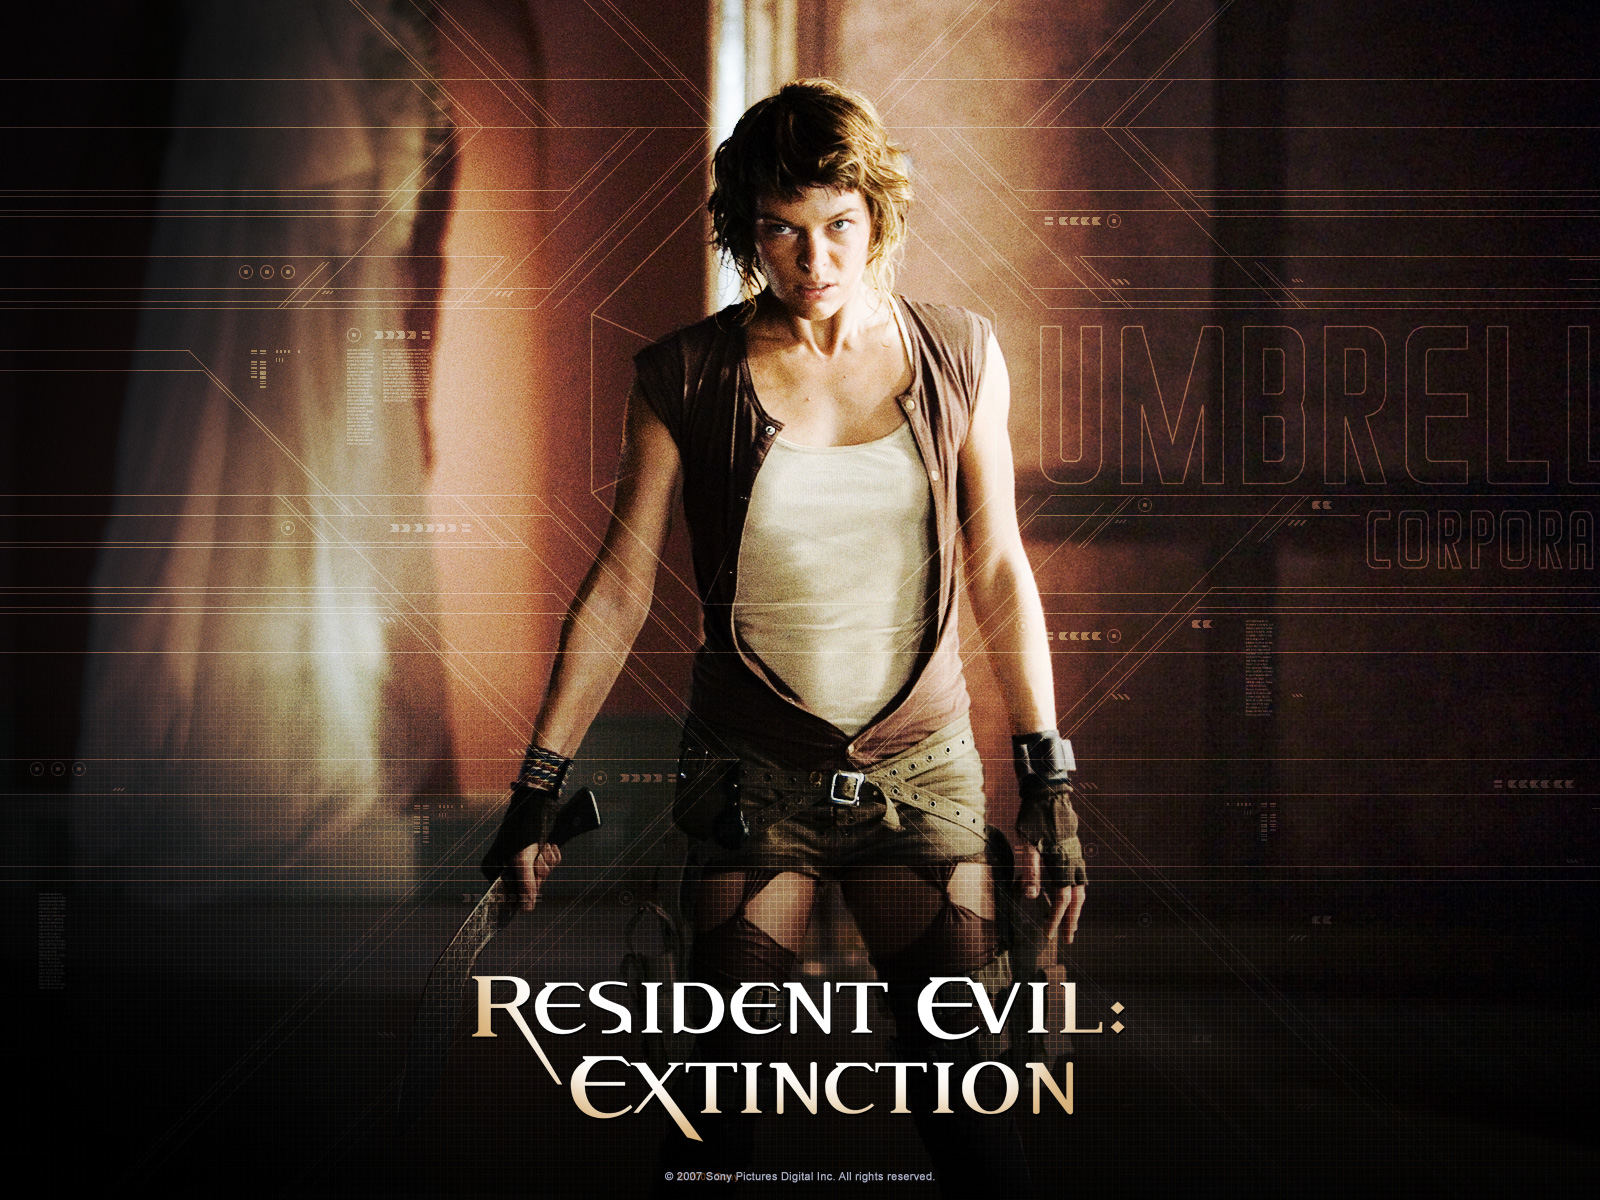 Resident Evil - Images Gallery